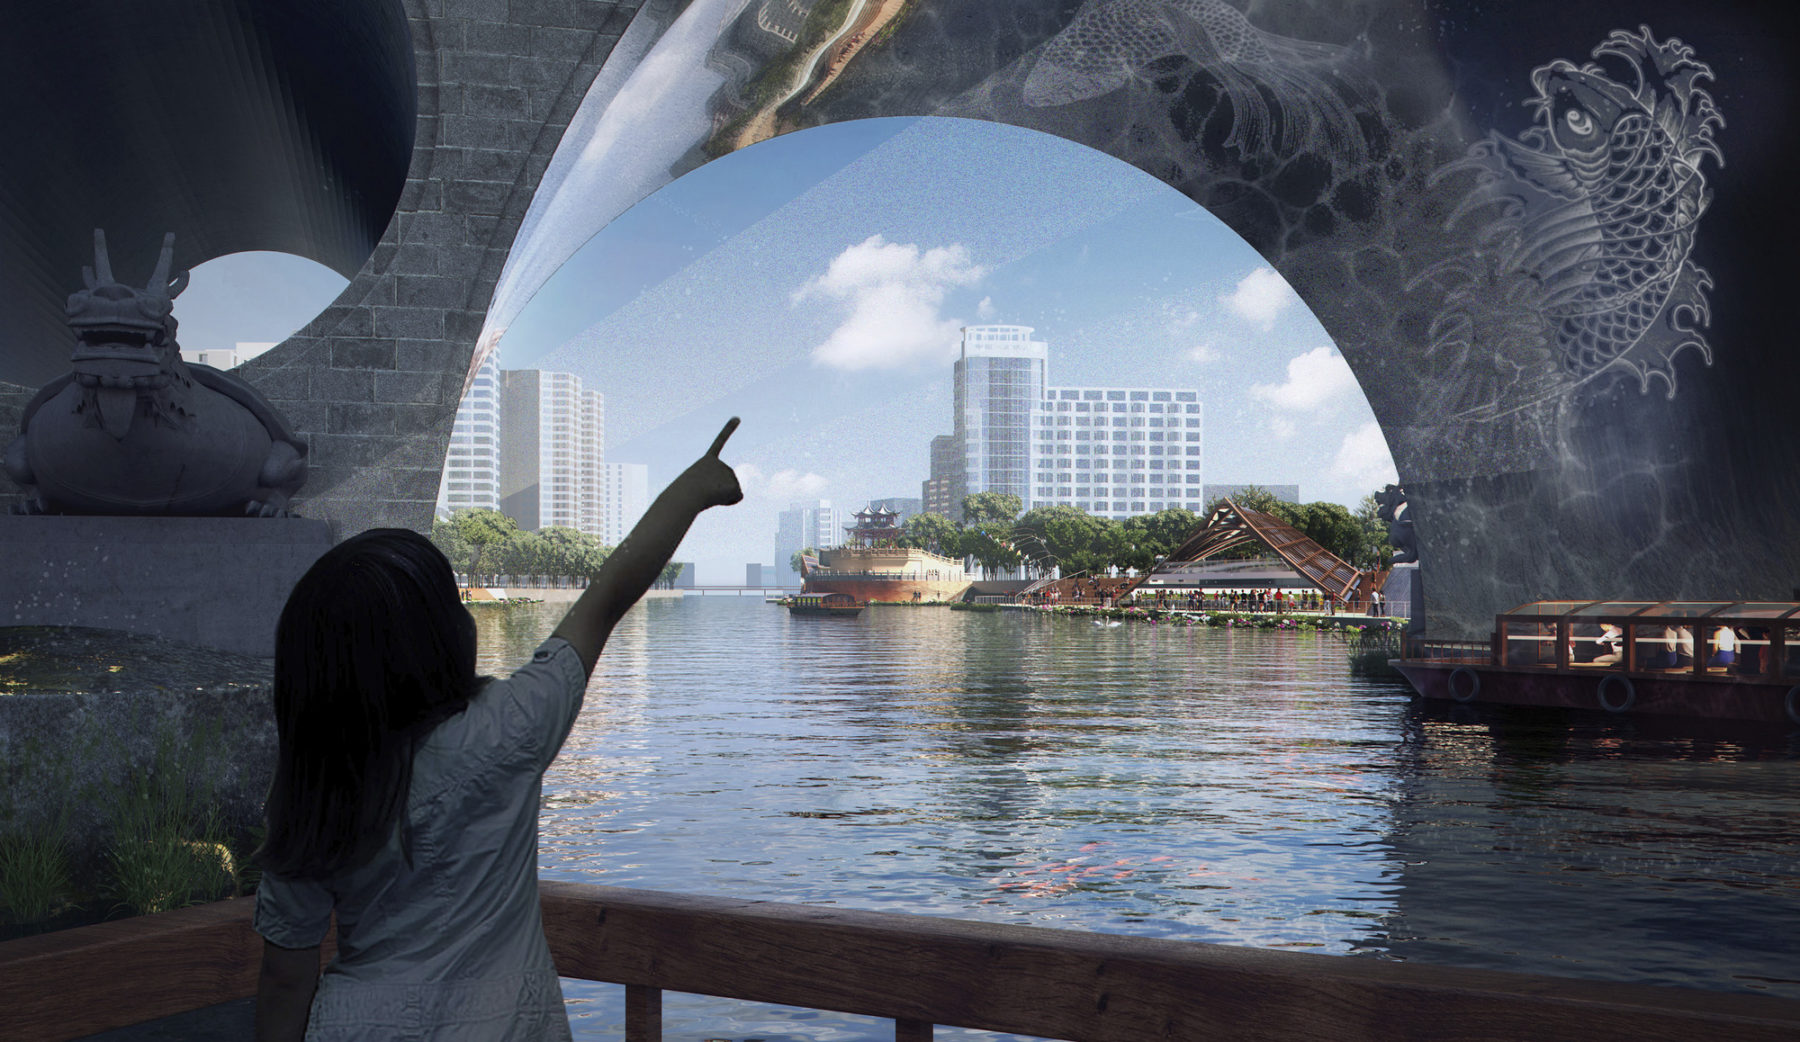 rendering of proposed underbridge design. a child points to a fish projection on the underside.